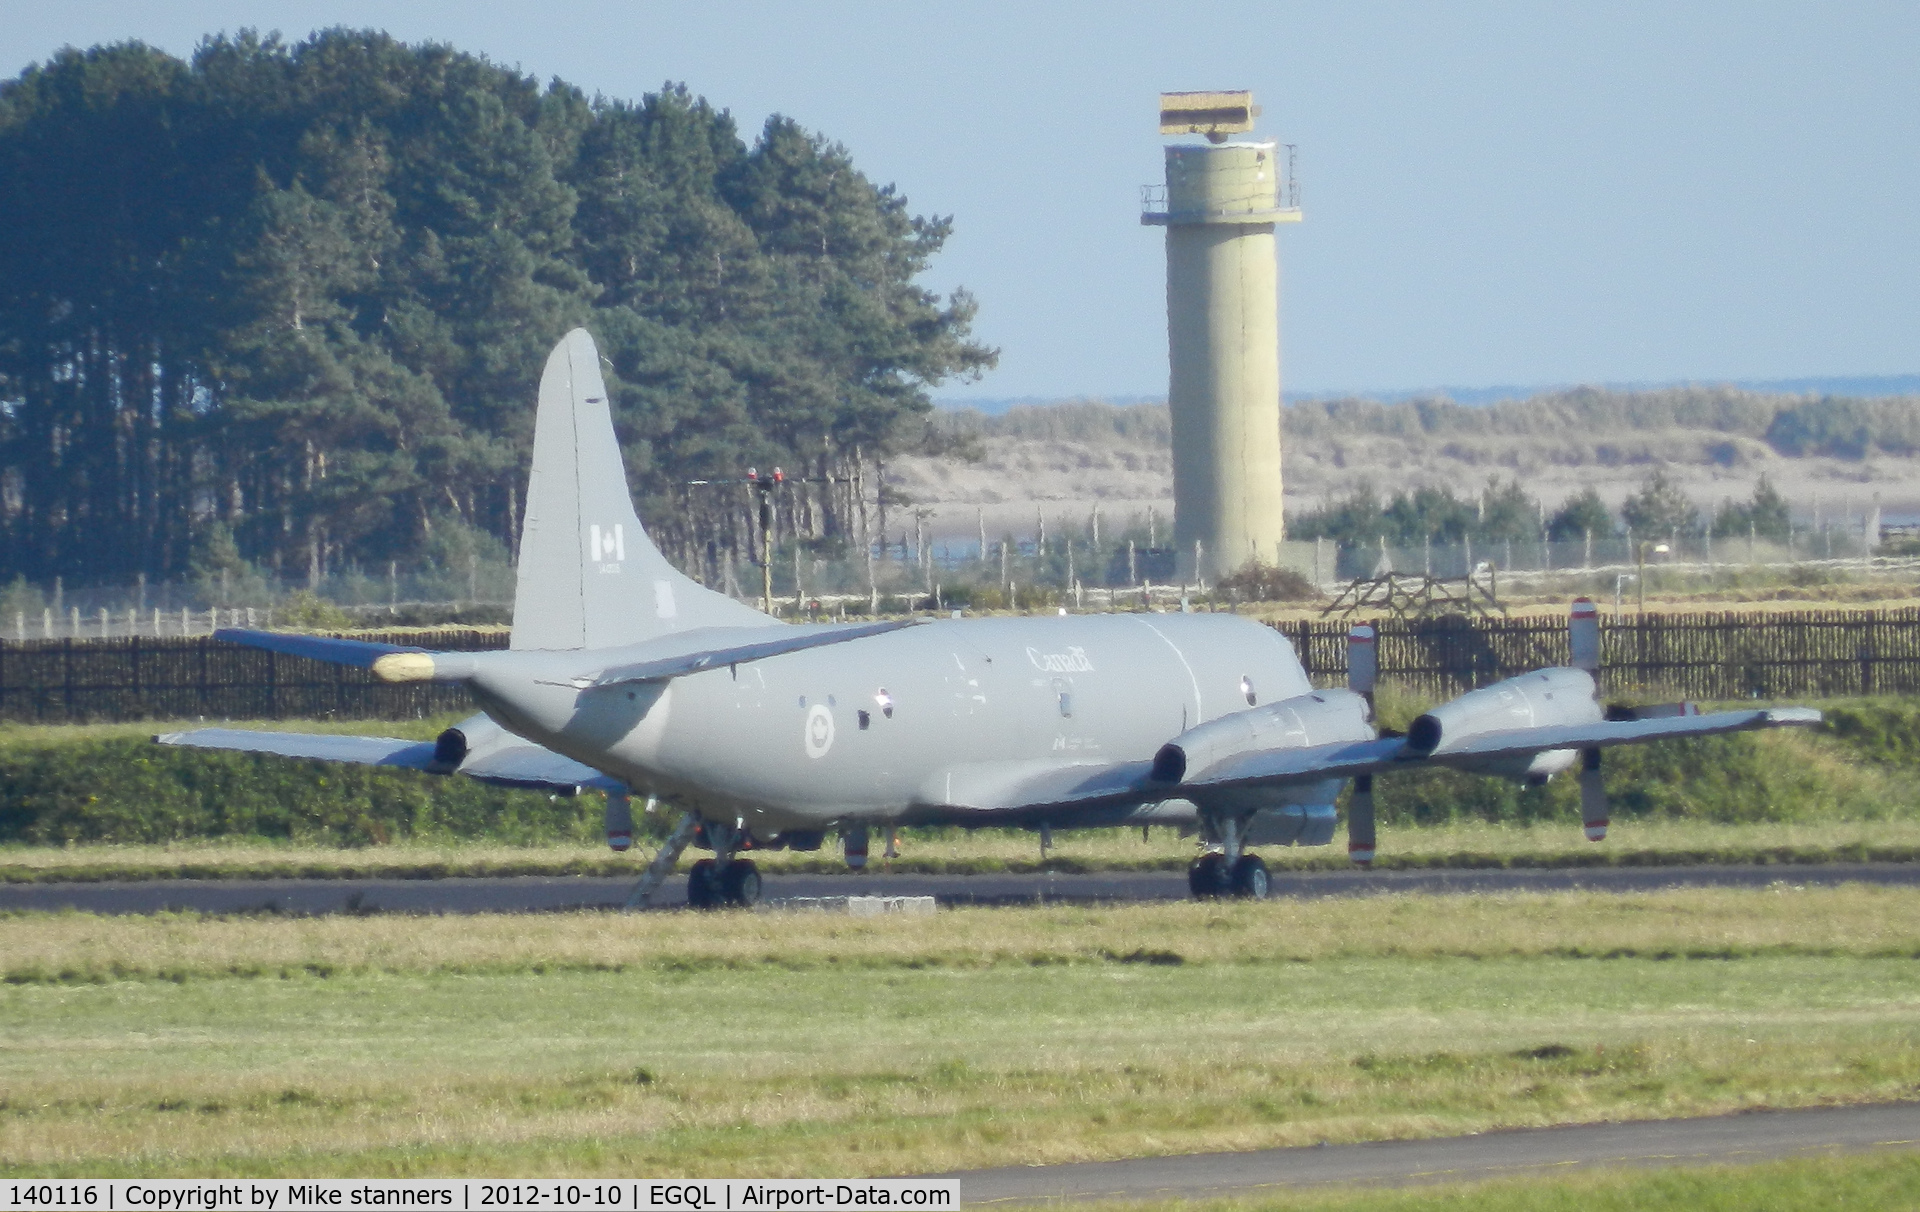 140116, 1981 Lockheed CP-140 Aurora C/N 285B-5722, 14 wing Aurora at Leuchars for a joint warrior exercise